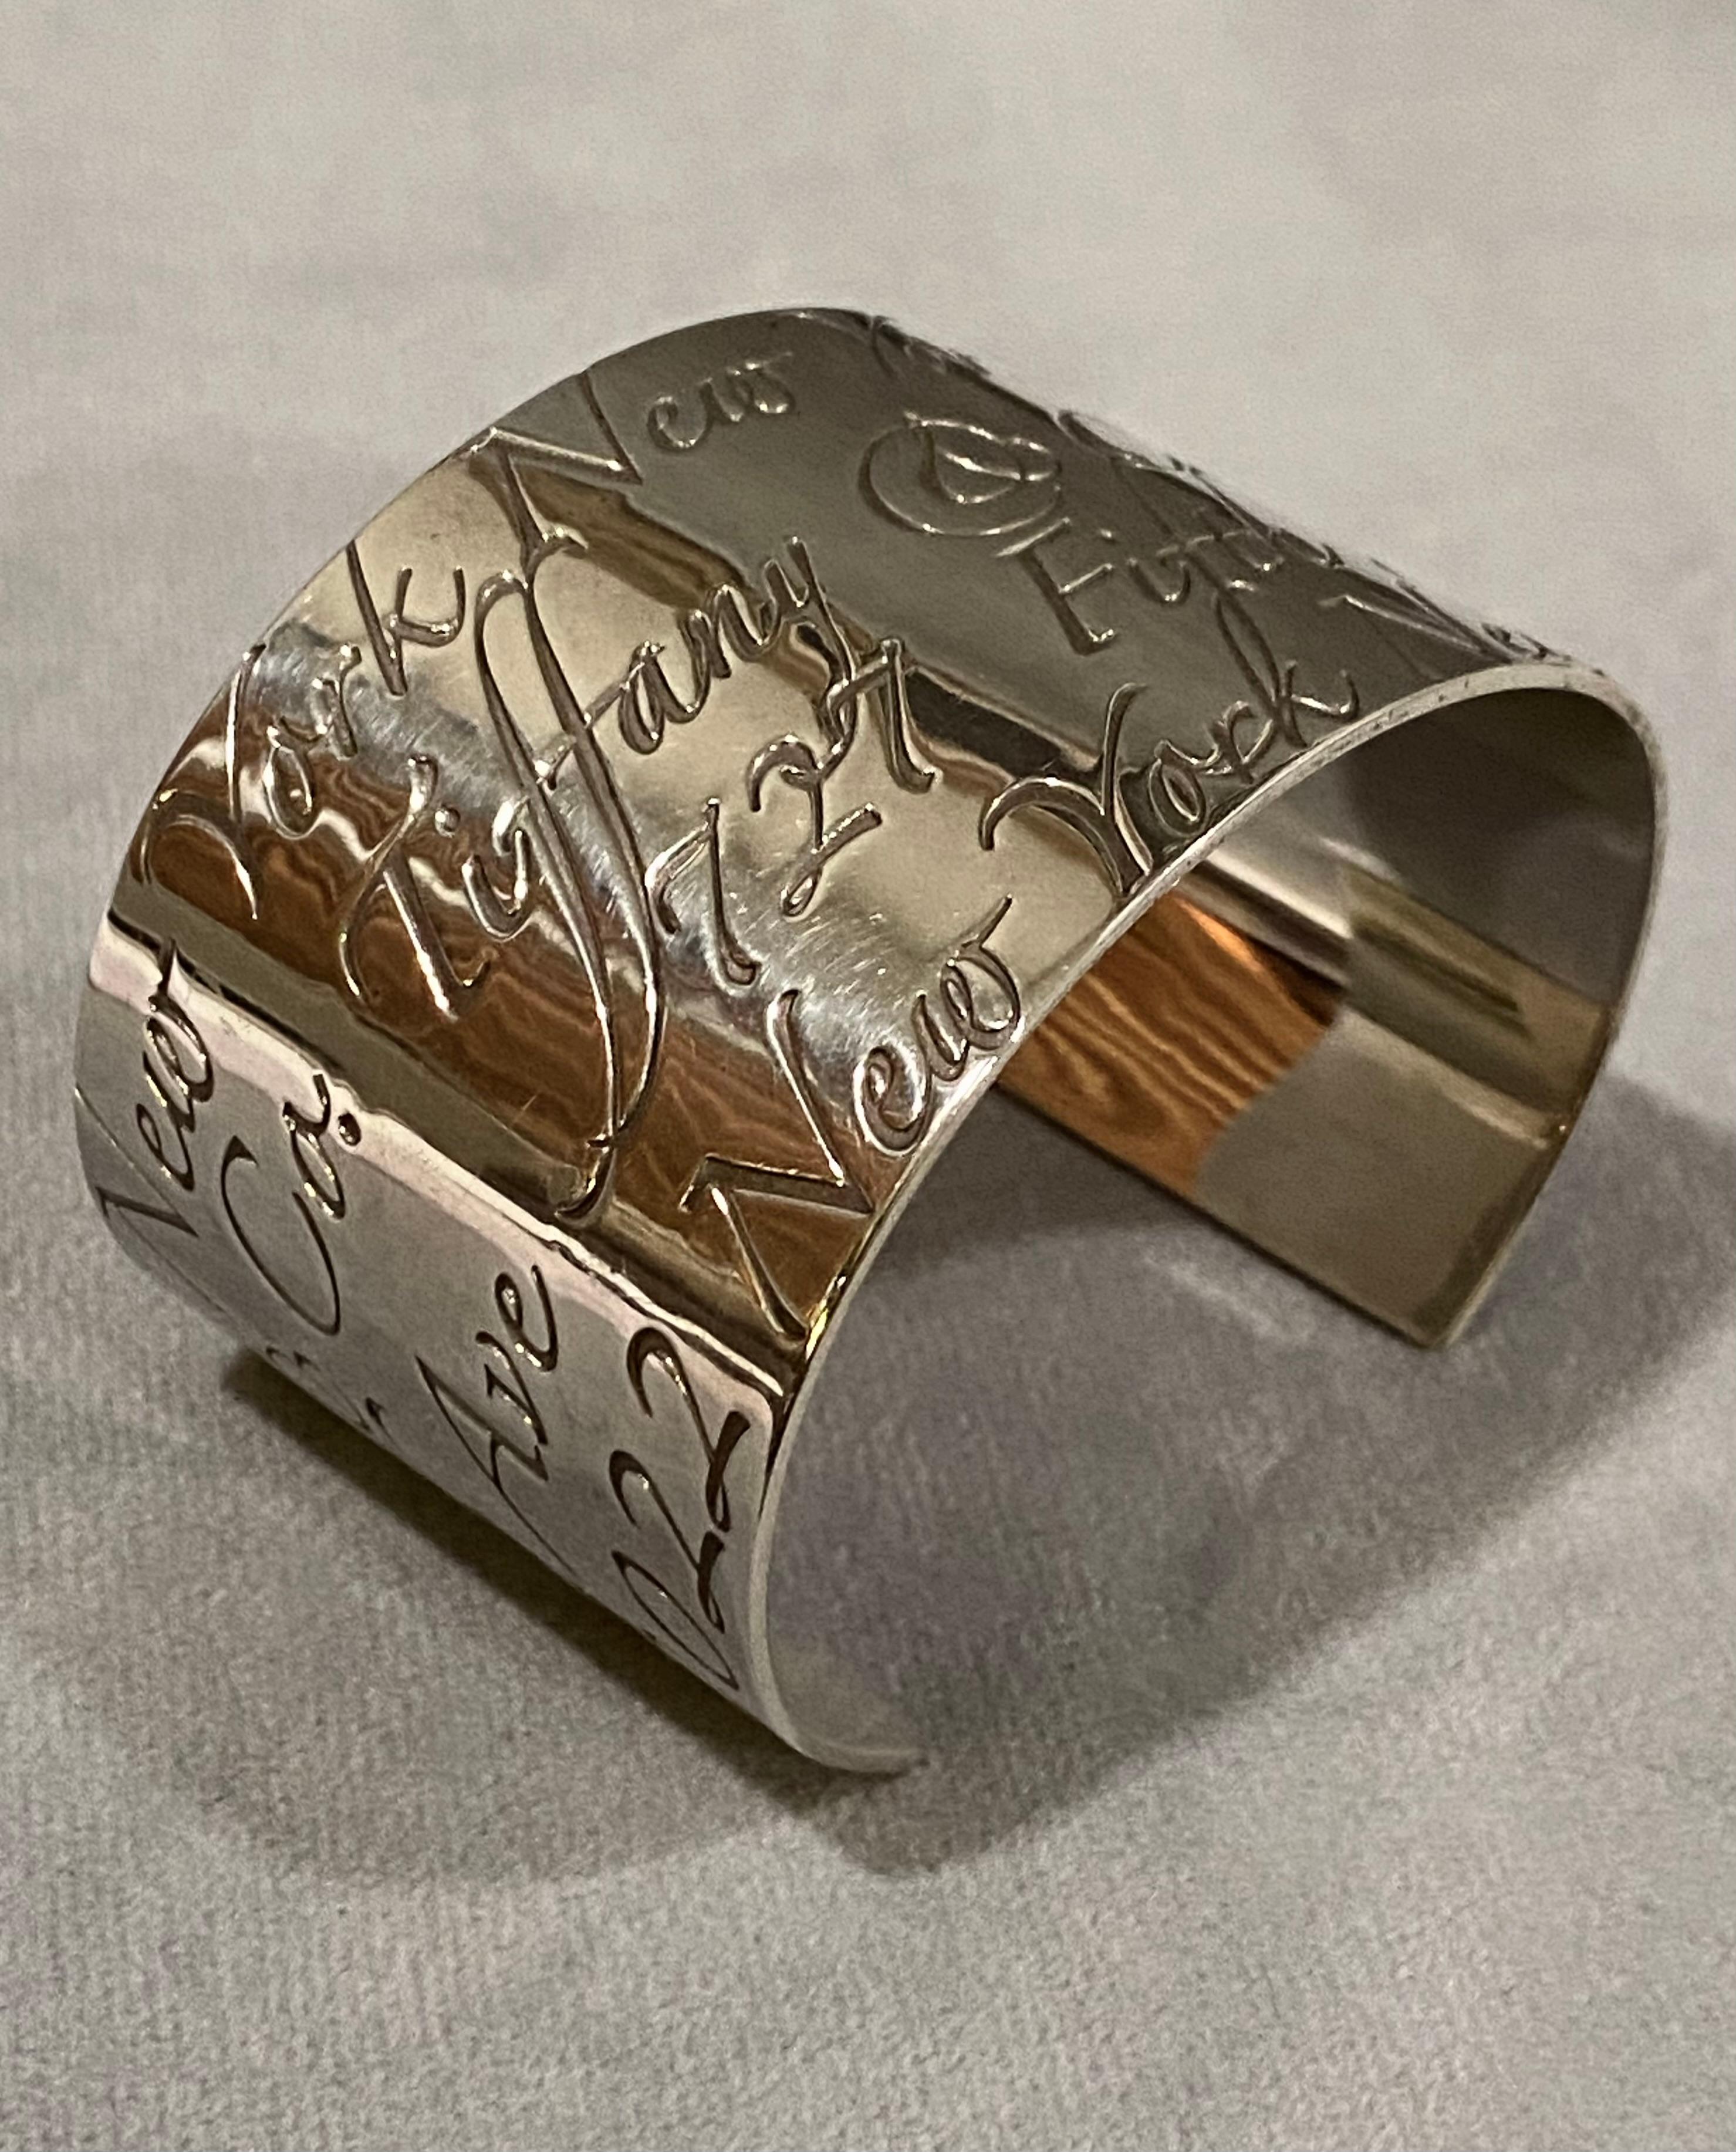 This iconic cuff bracelet design by Tiffany & Co. in sterling silver is part of the Notes collection. It is designed with repeating script that reads 'Tiffany & Co 727 Fifth Ave New York'. The Notes collection highlights the flagship store address